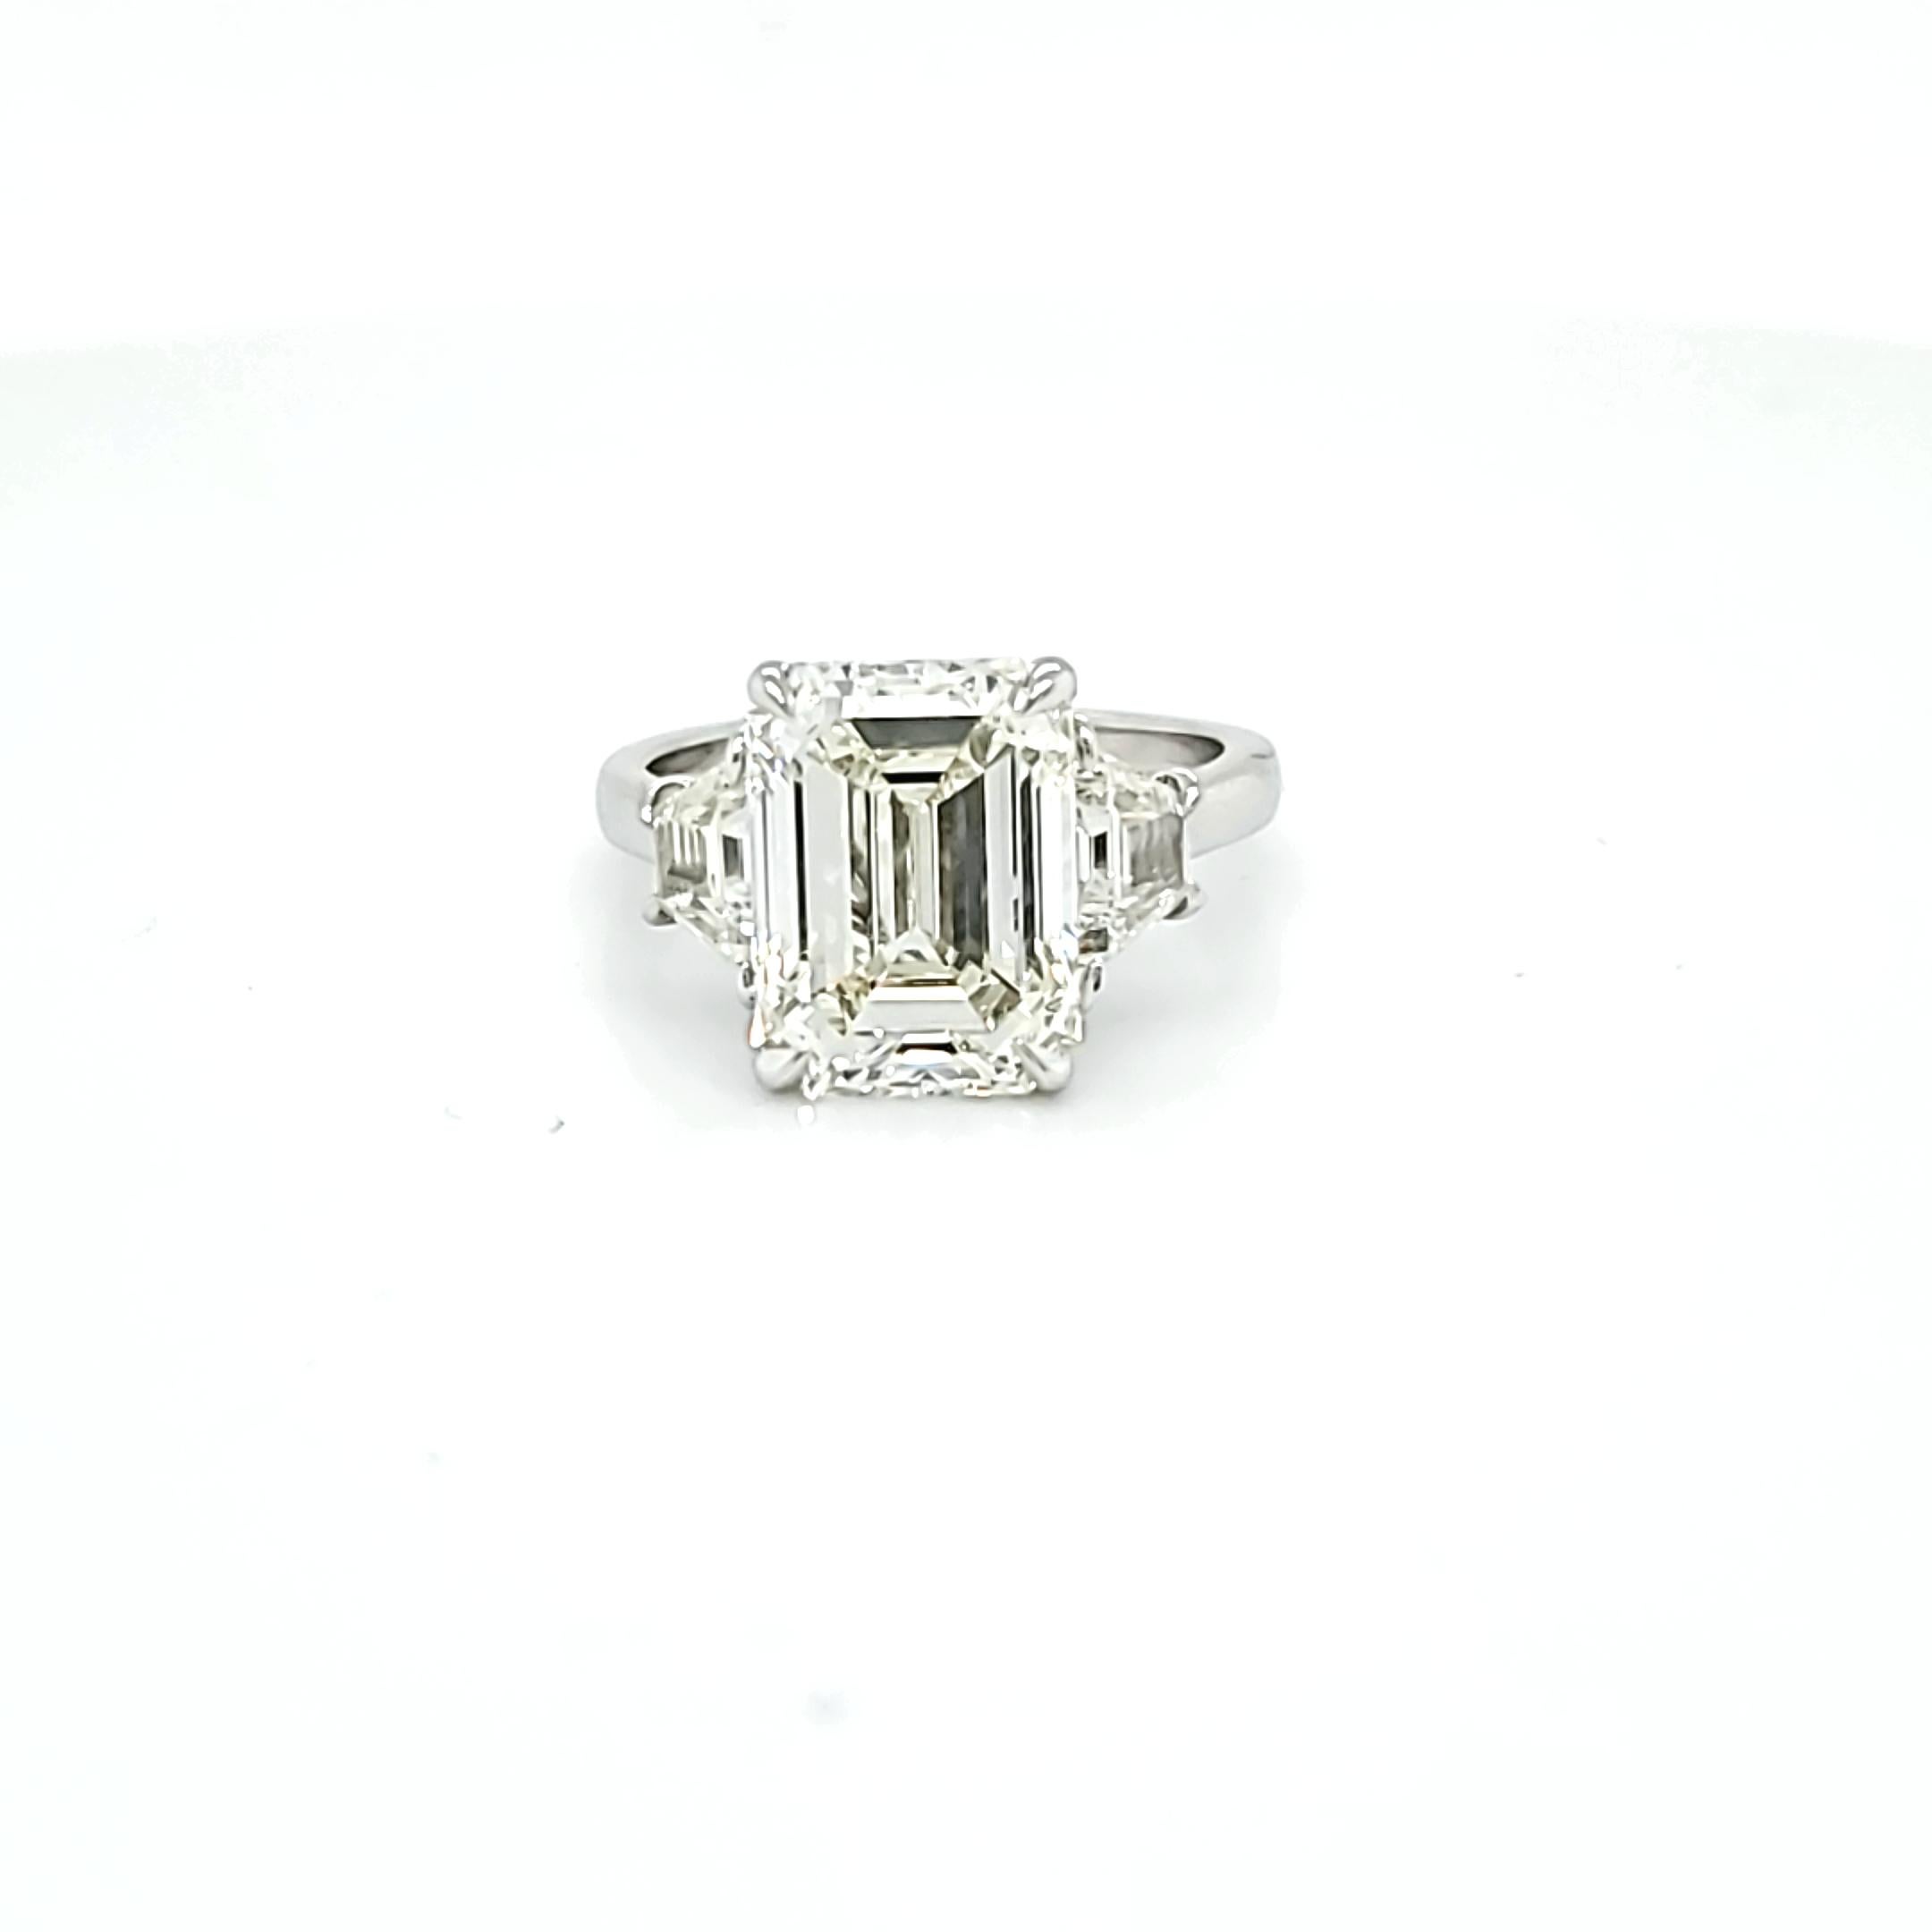 Center Stone is 5.12 carat Emerald Cut DIamond with an L color and VS1 clarity. Side stones are step cut trapezoid shaped diamonds weighing 0.91 carats total and a similar color and clarity to the center stone. Set in a platinum ring.This is an